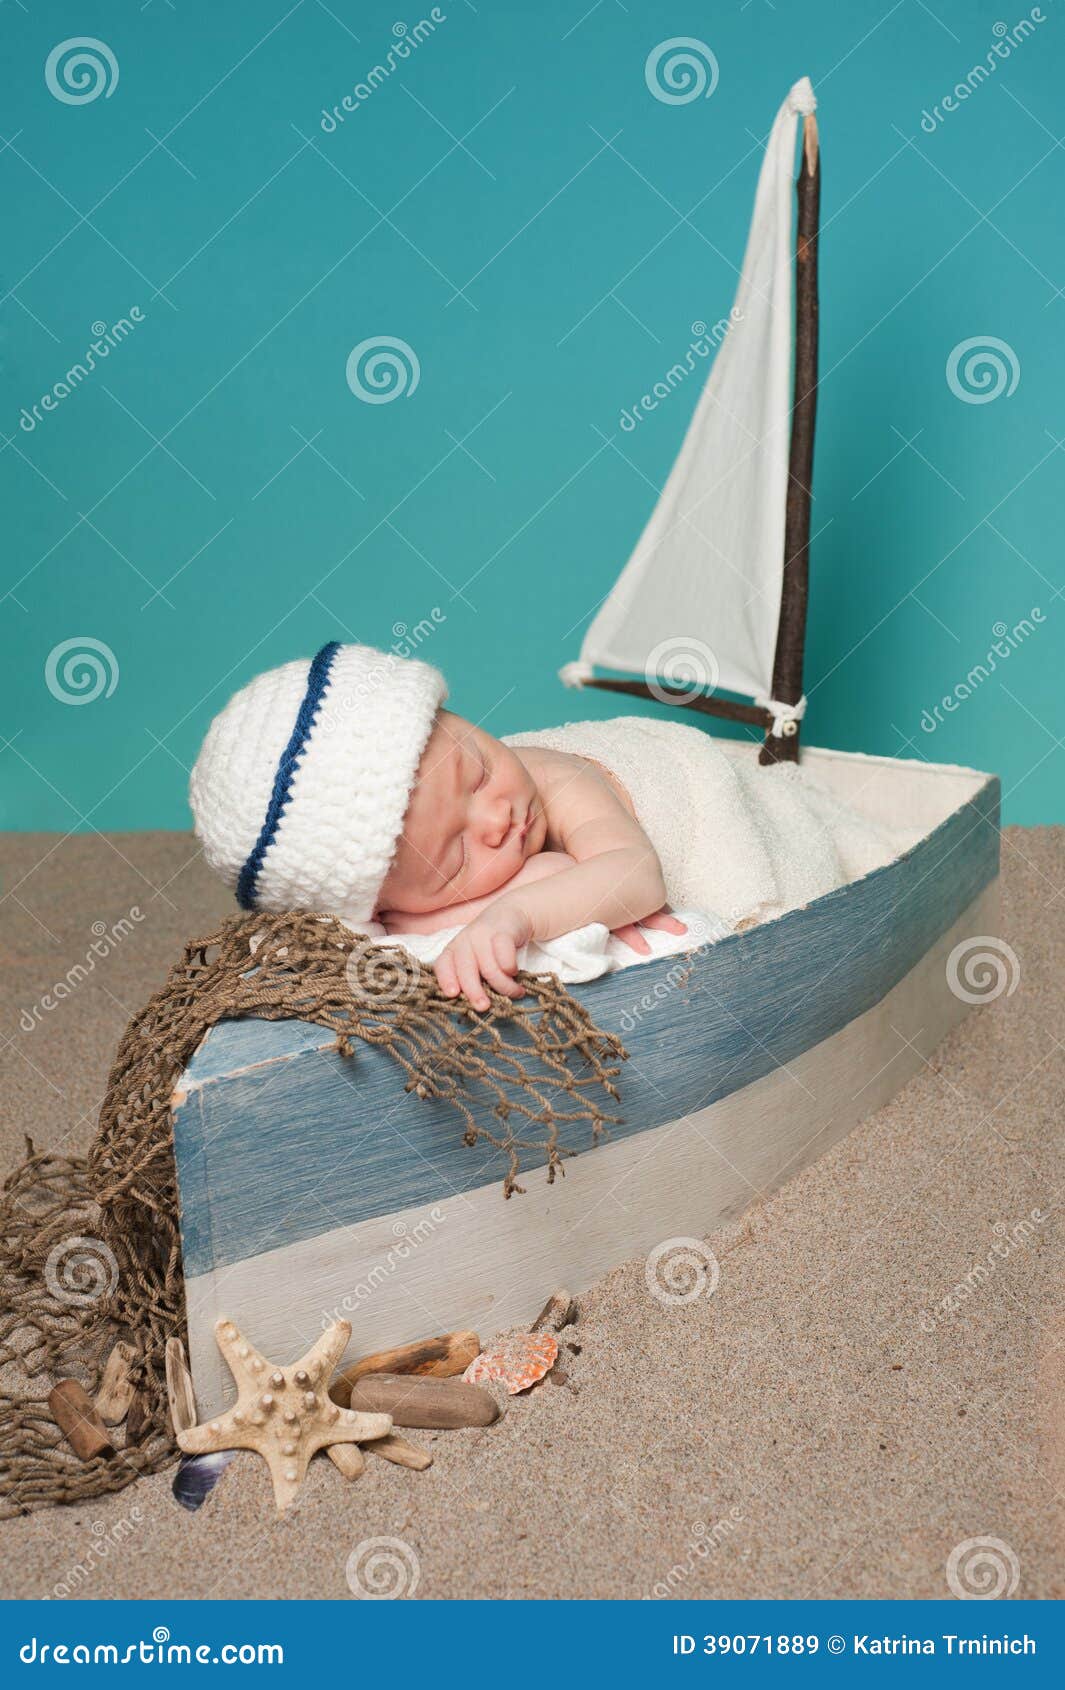  - newborn-baby-boy-sailor-sleeping-sailboat-one-week-old-wearing-white-blue-hat-little-surrounded-sand-39071889